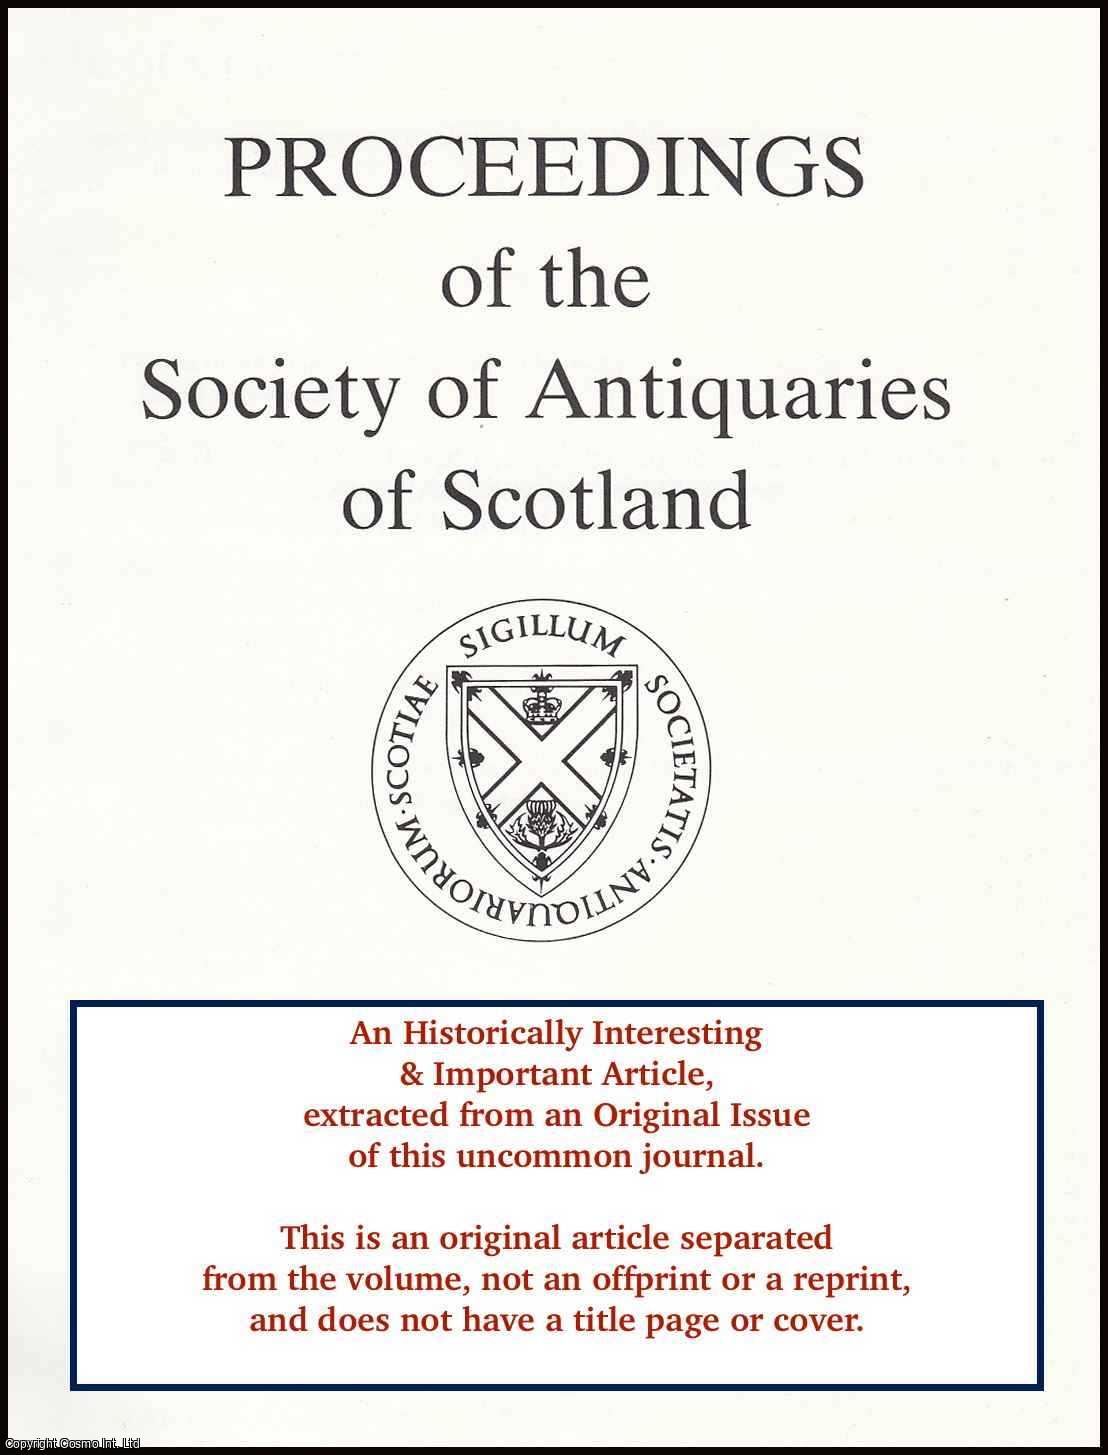 Russel J. Coleman, Peter Cheer, Adrian Cox, Nicholas Holmes, Catherine Smith & Alan Fairweather - Burgage Plots of Medieval Perth: The Evidence From Excavations at Canal Street. An original article from the Proceedings of the Society of Antiquaries of Scotland, 1996.